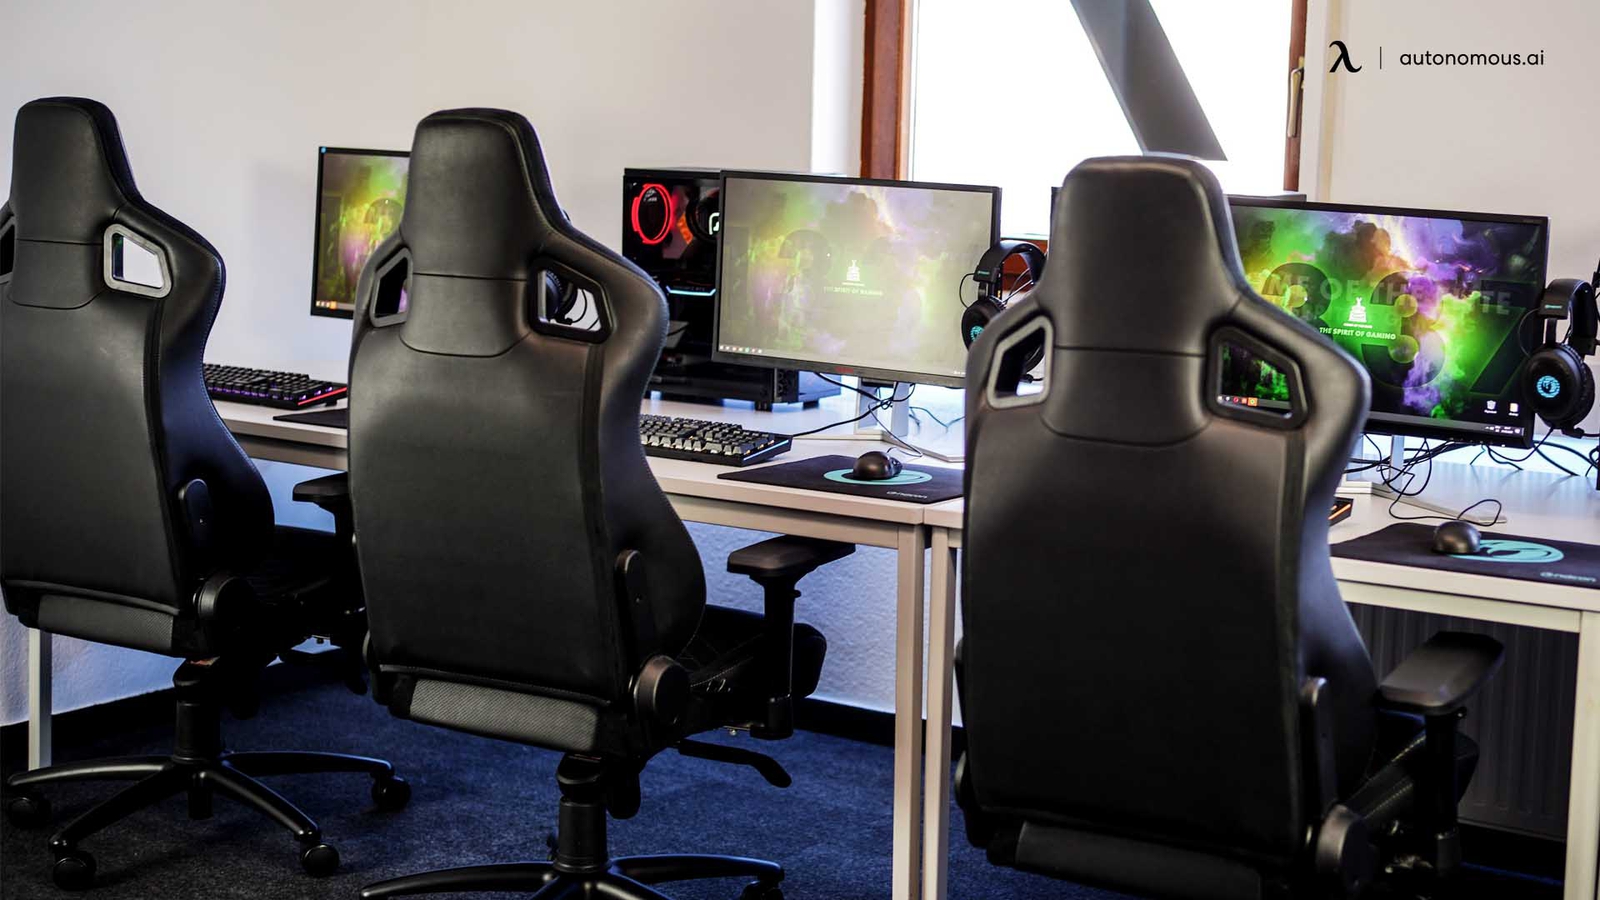 15 Best Ergonomic Gaming Chair for Gamers & Streamers